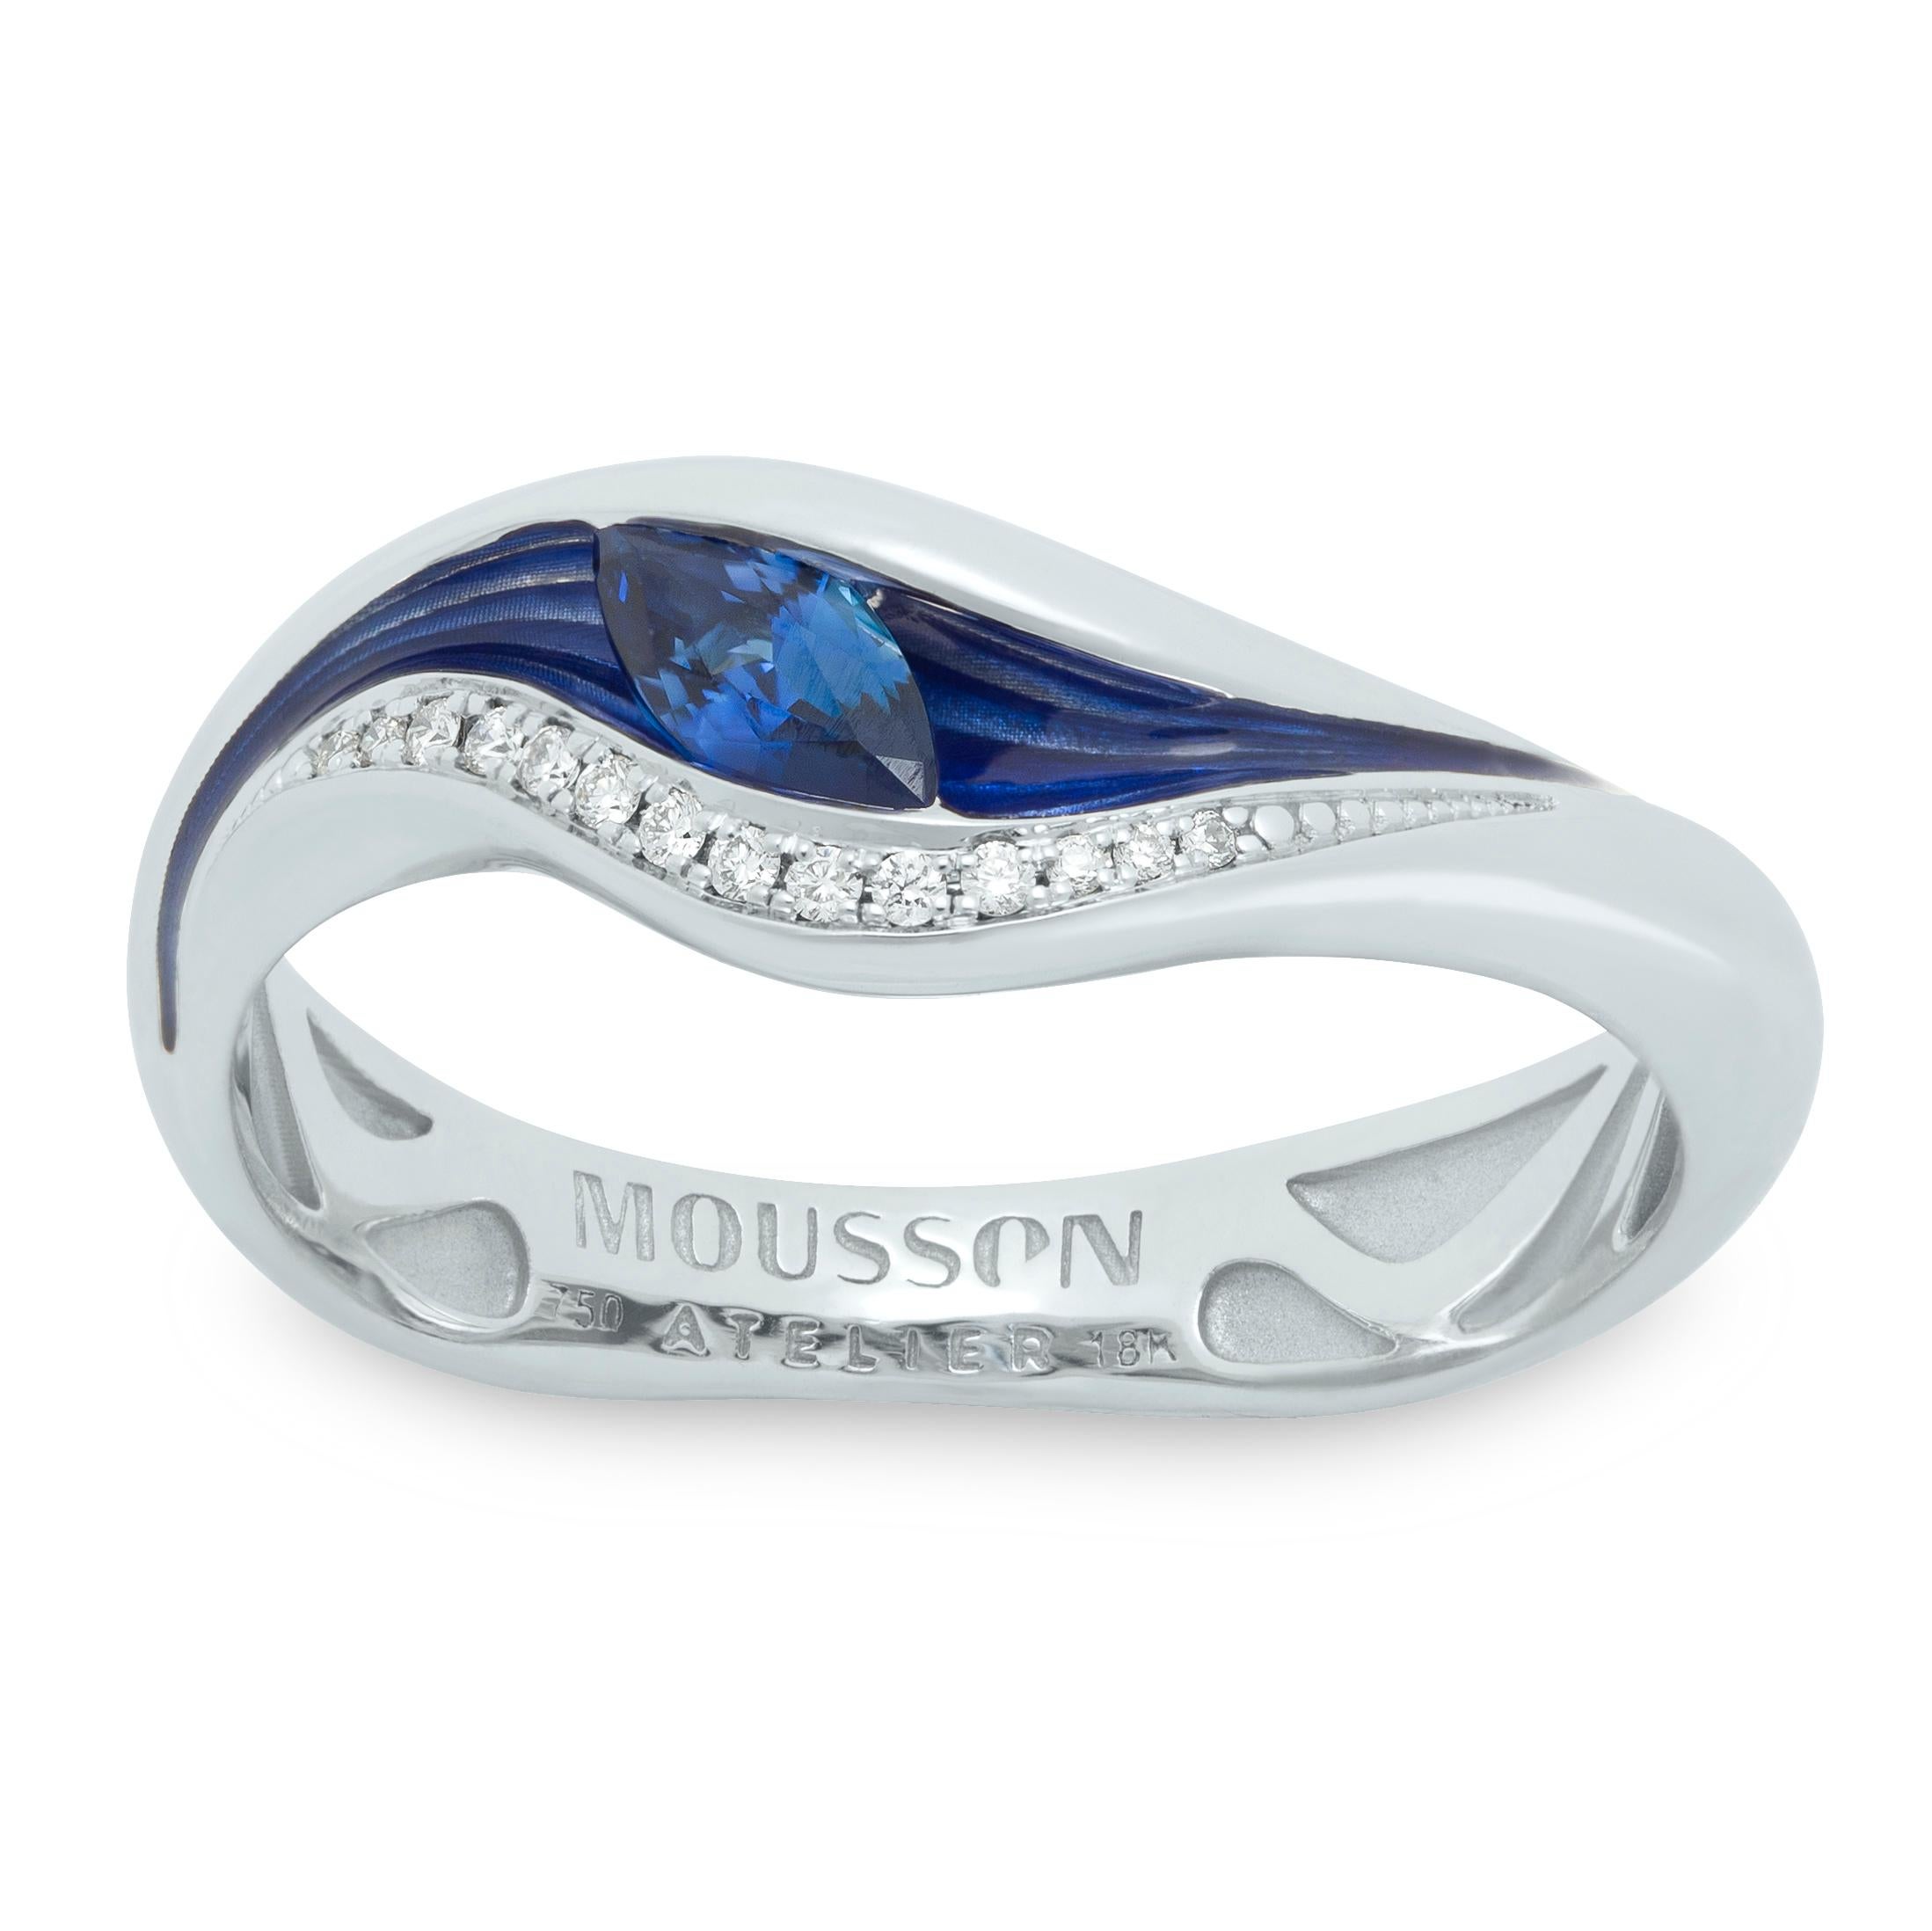 Blue Sapphire Diamonds Enamel 18 Karat White Gold Melted Colors Ring
Another Ring from our Melted Colors collection. As we can see, enamel is matched perfectly by our designers to the color of the central stones in order to create the effect of